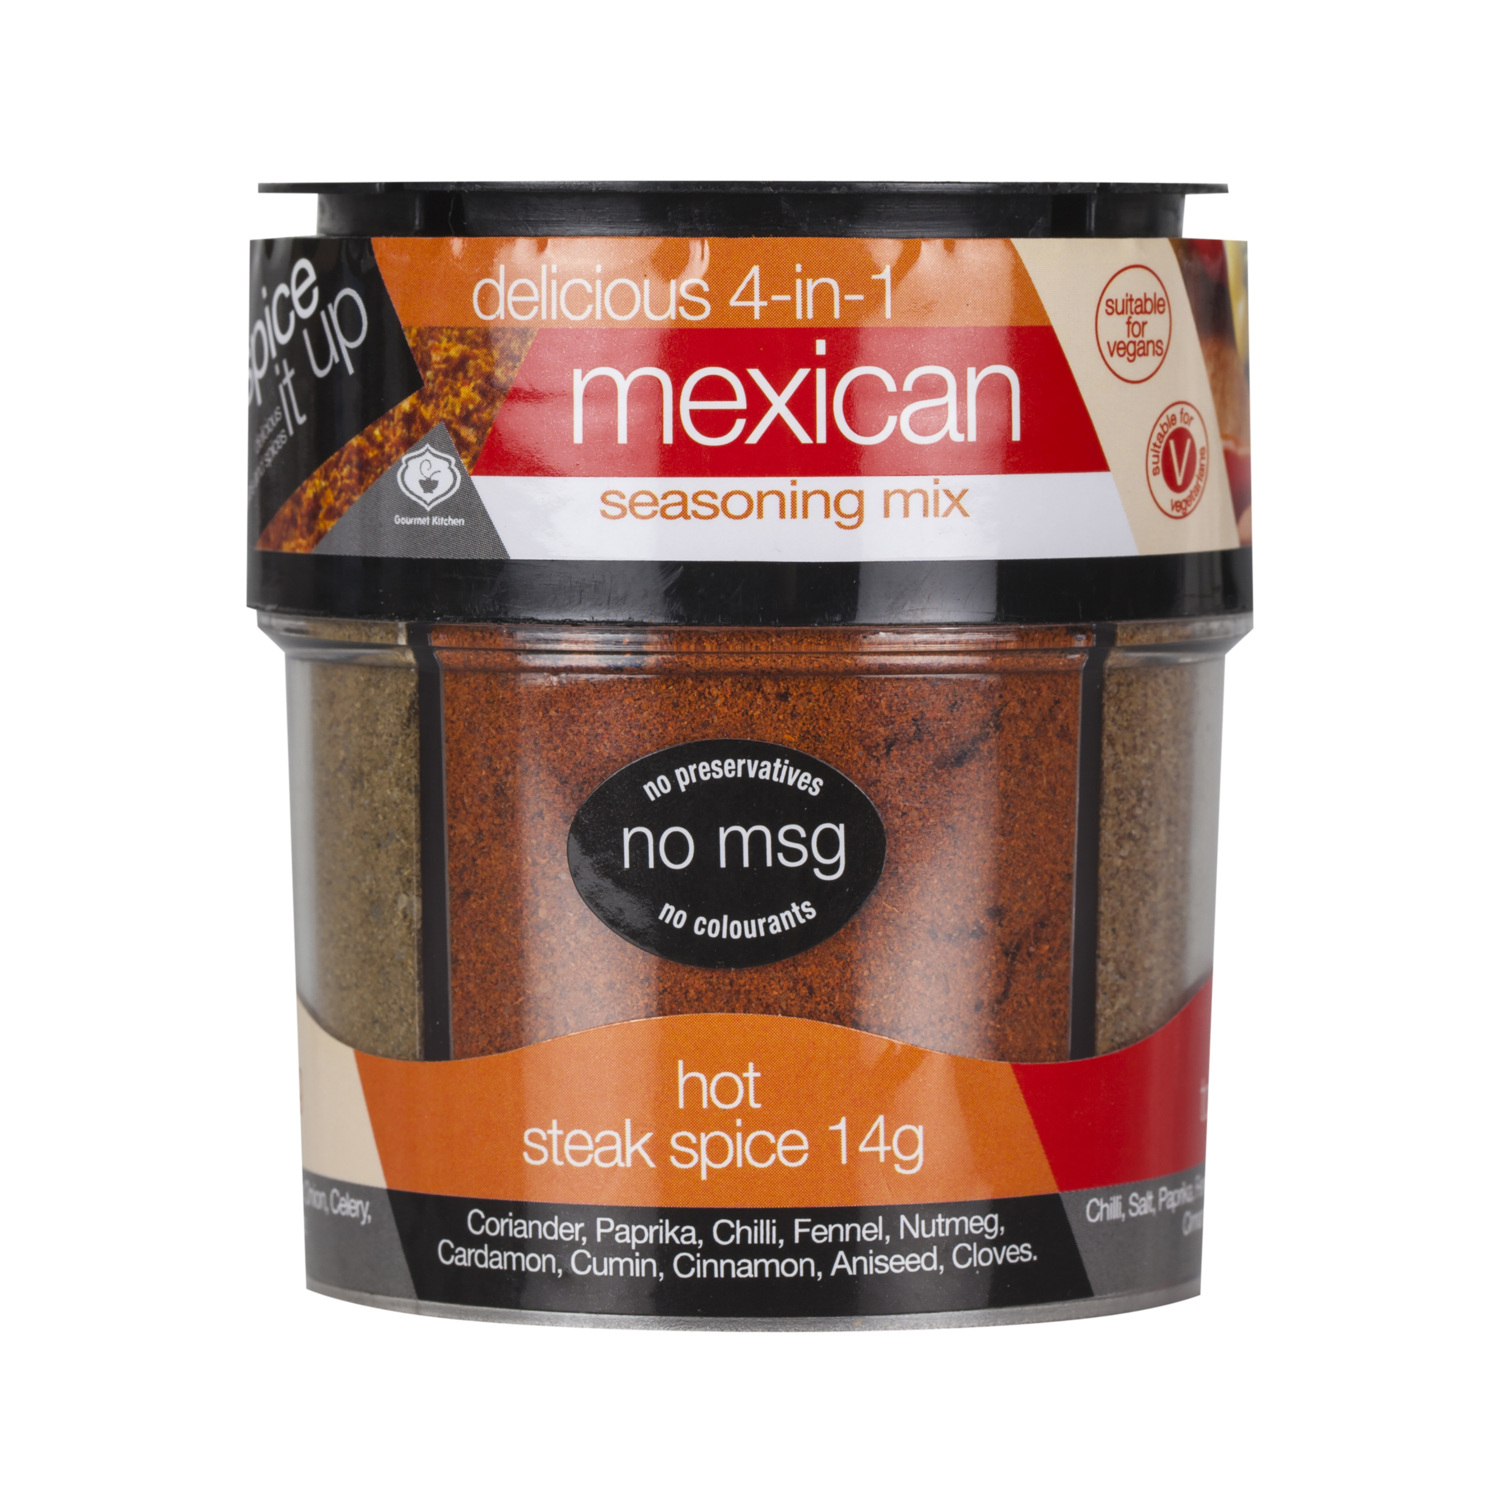 Mix 4-in-1 Mexican Seasoning Image 1